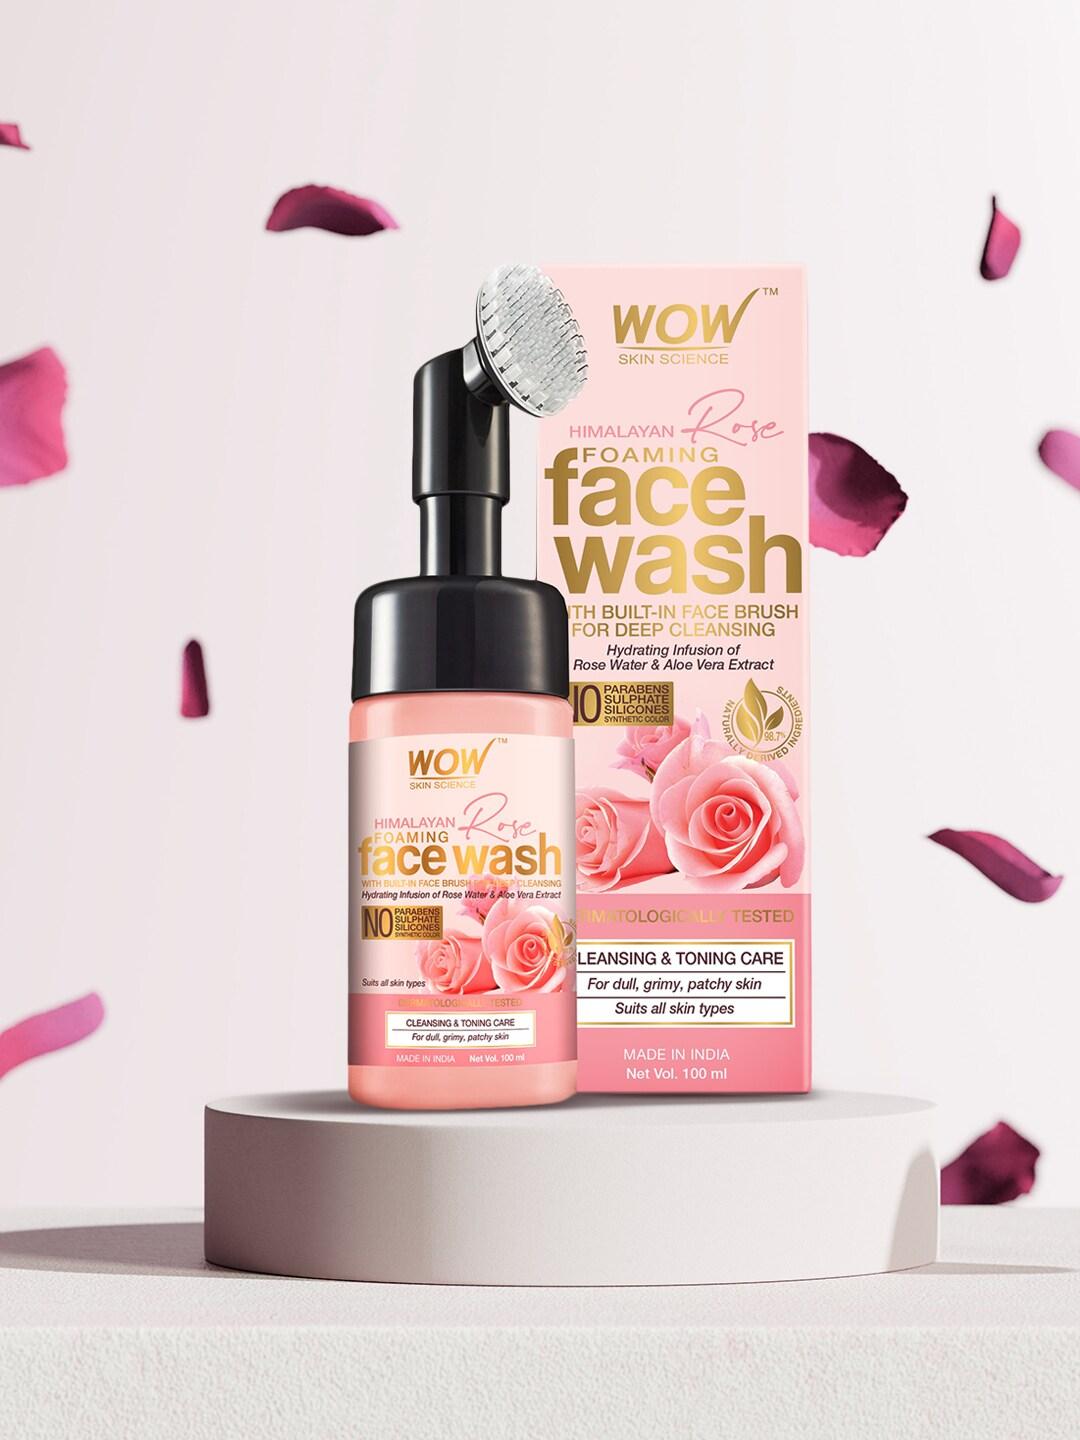 WOW SKIN SCIENCE Unisex Himalayan Rose Foaming Face Wash with Built-in Face Brush 100 ml